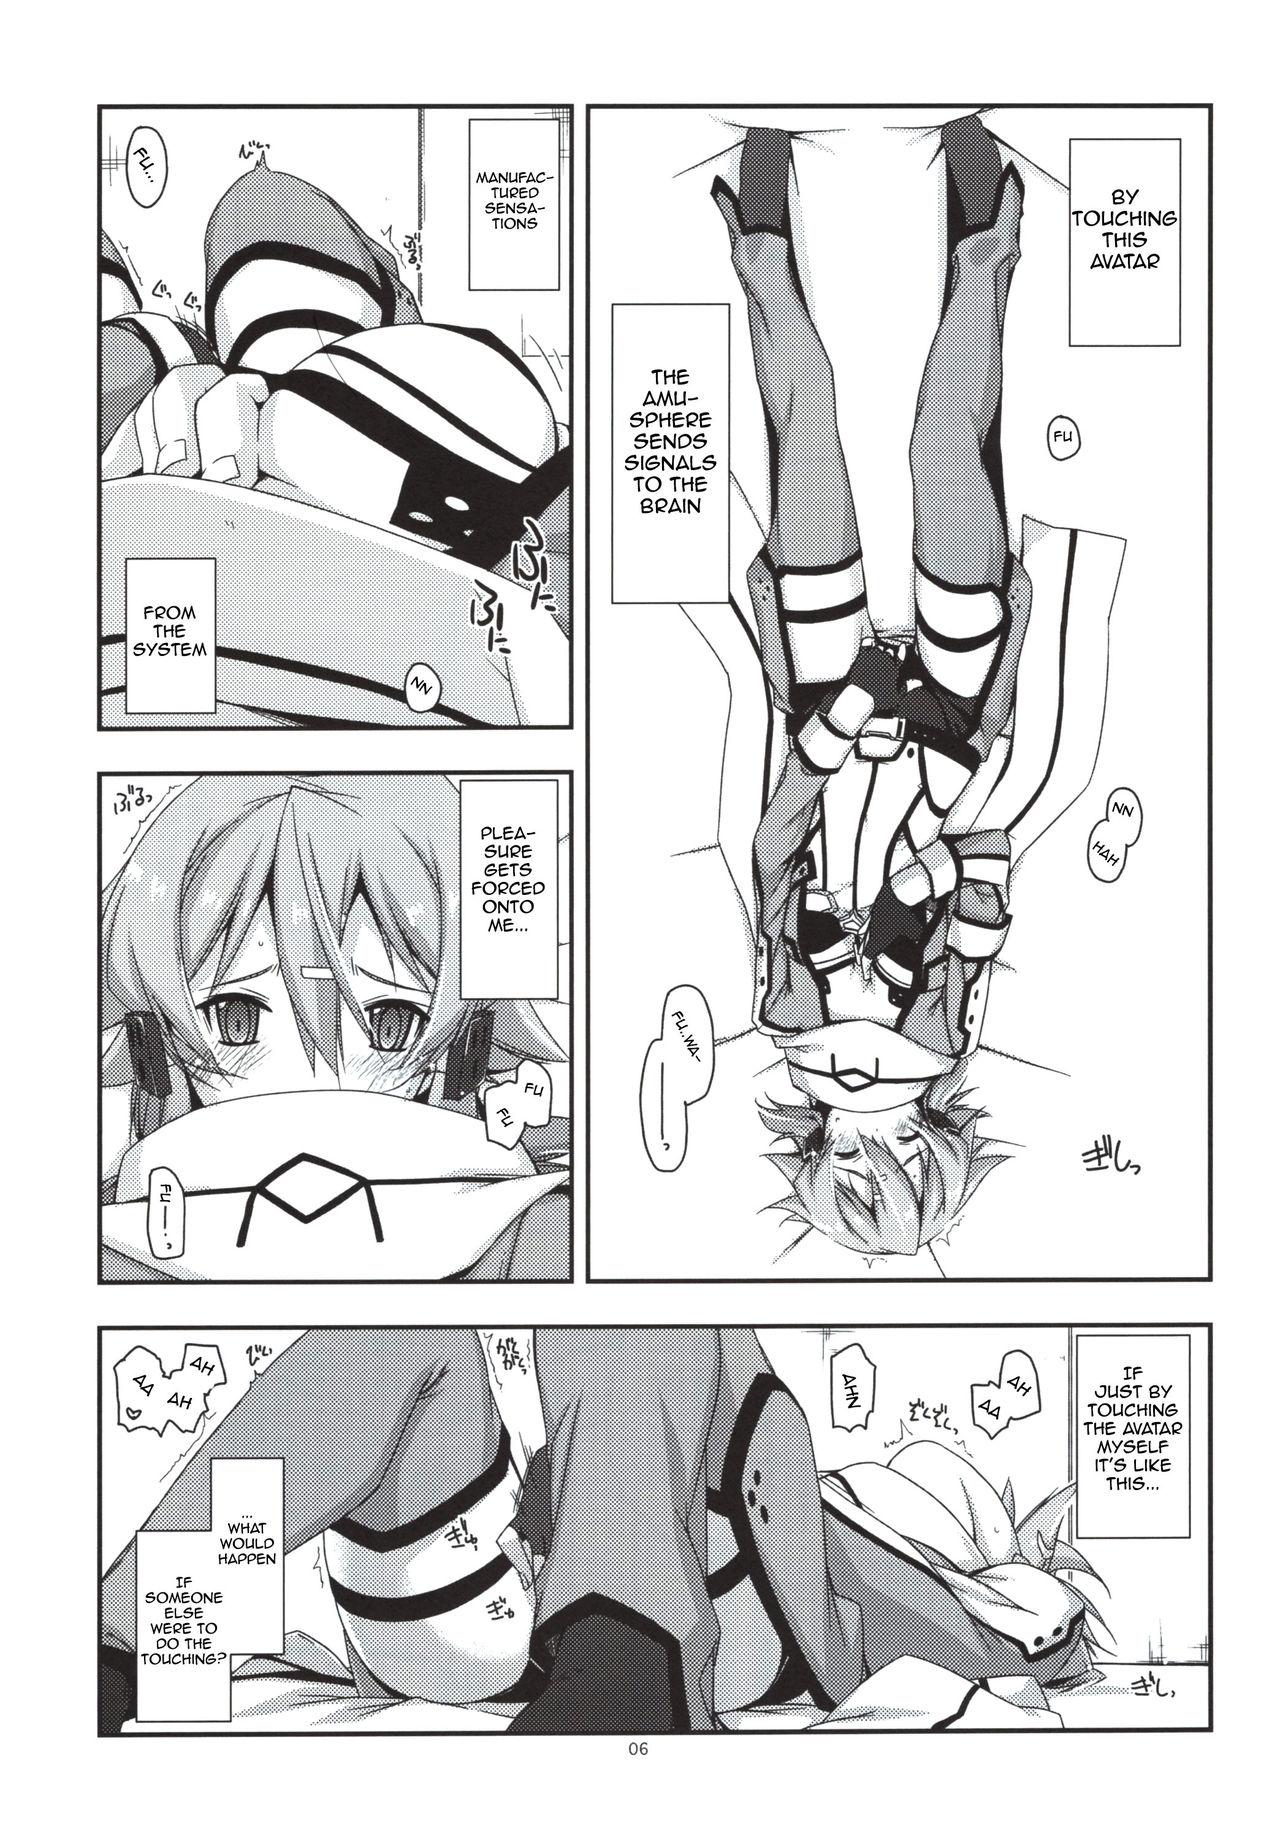 Moaning Crack - Sword art online Show - Page 6